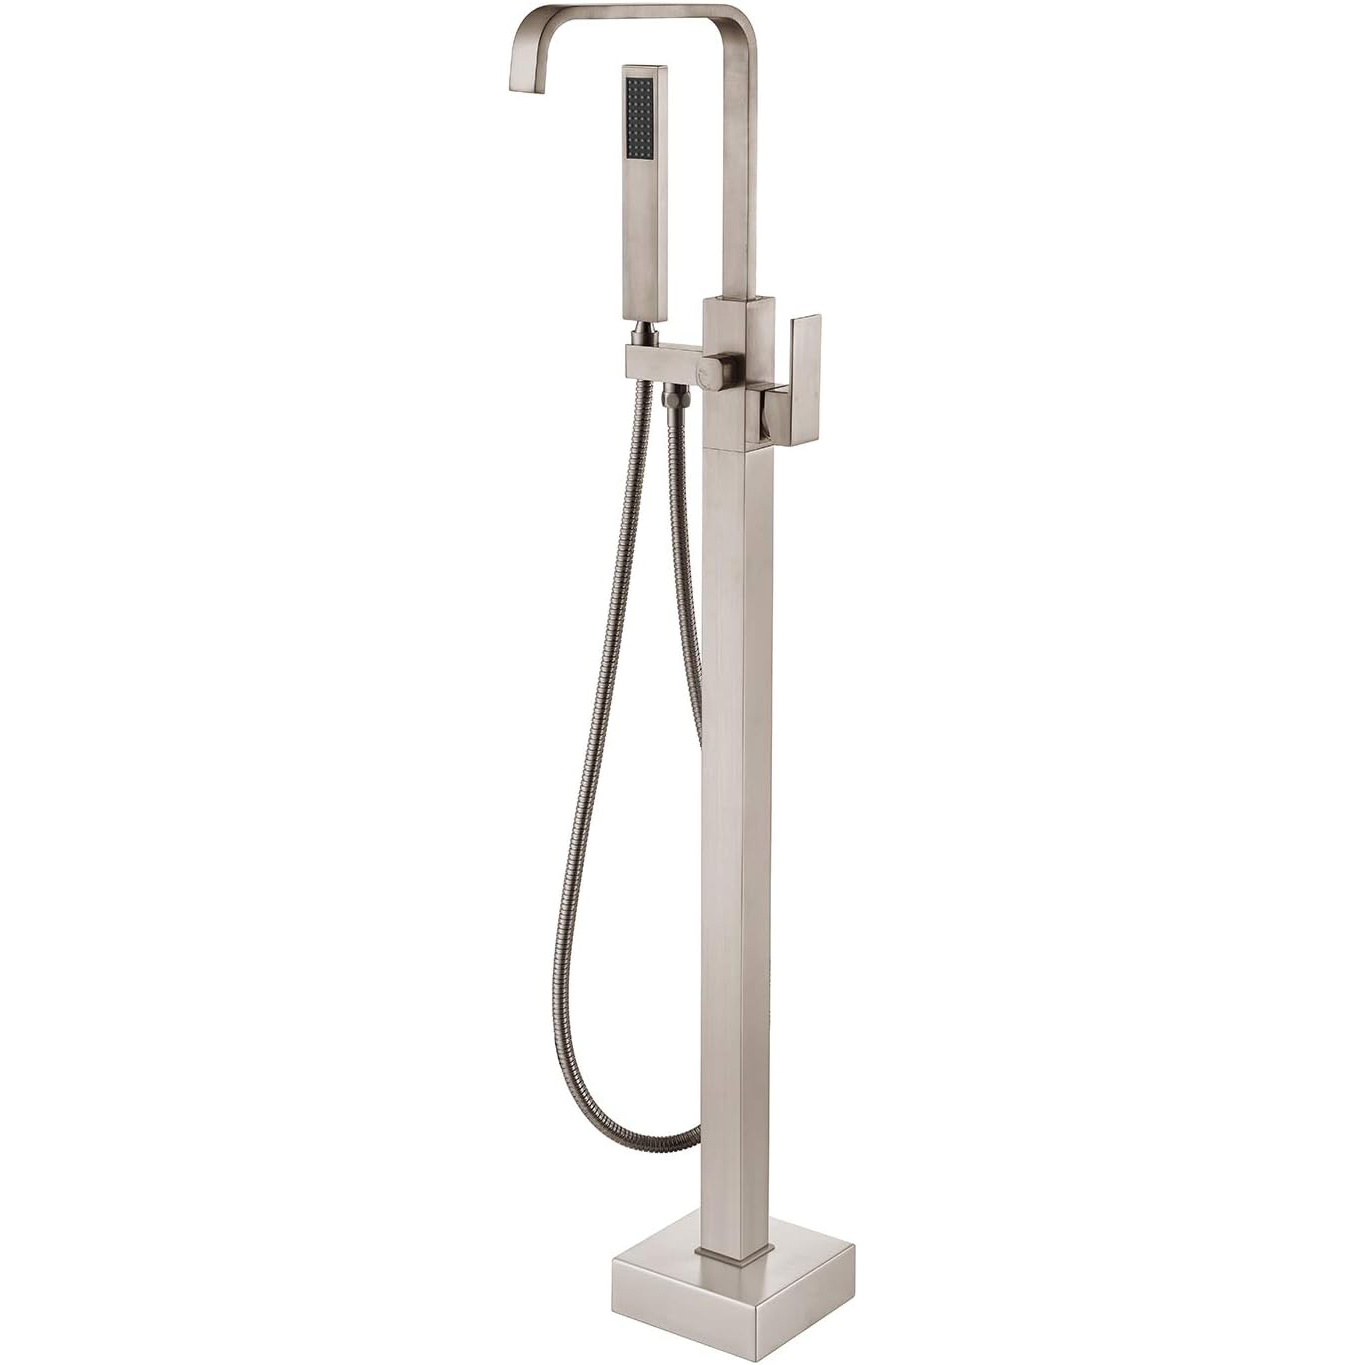 Wovier Floor Mounted Tub Filler Faucet, Freestanding Bathtub Faucet with Hand Shower W8785